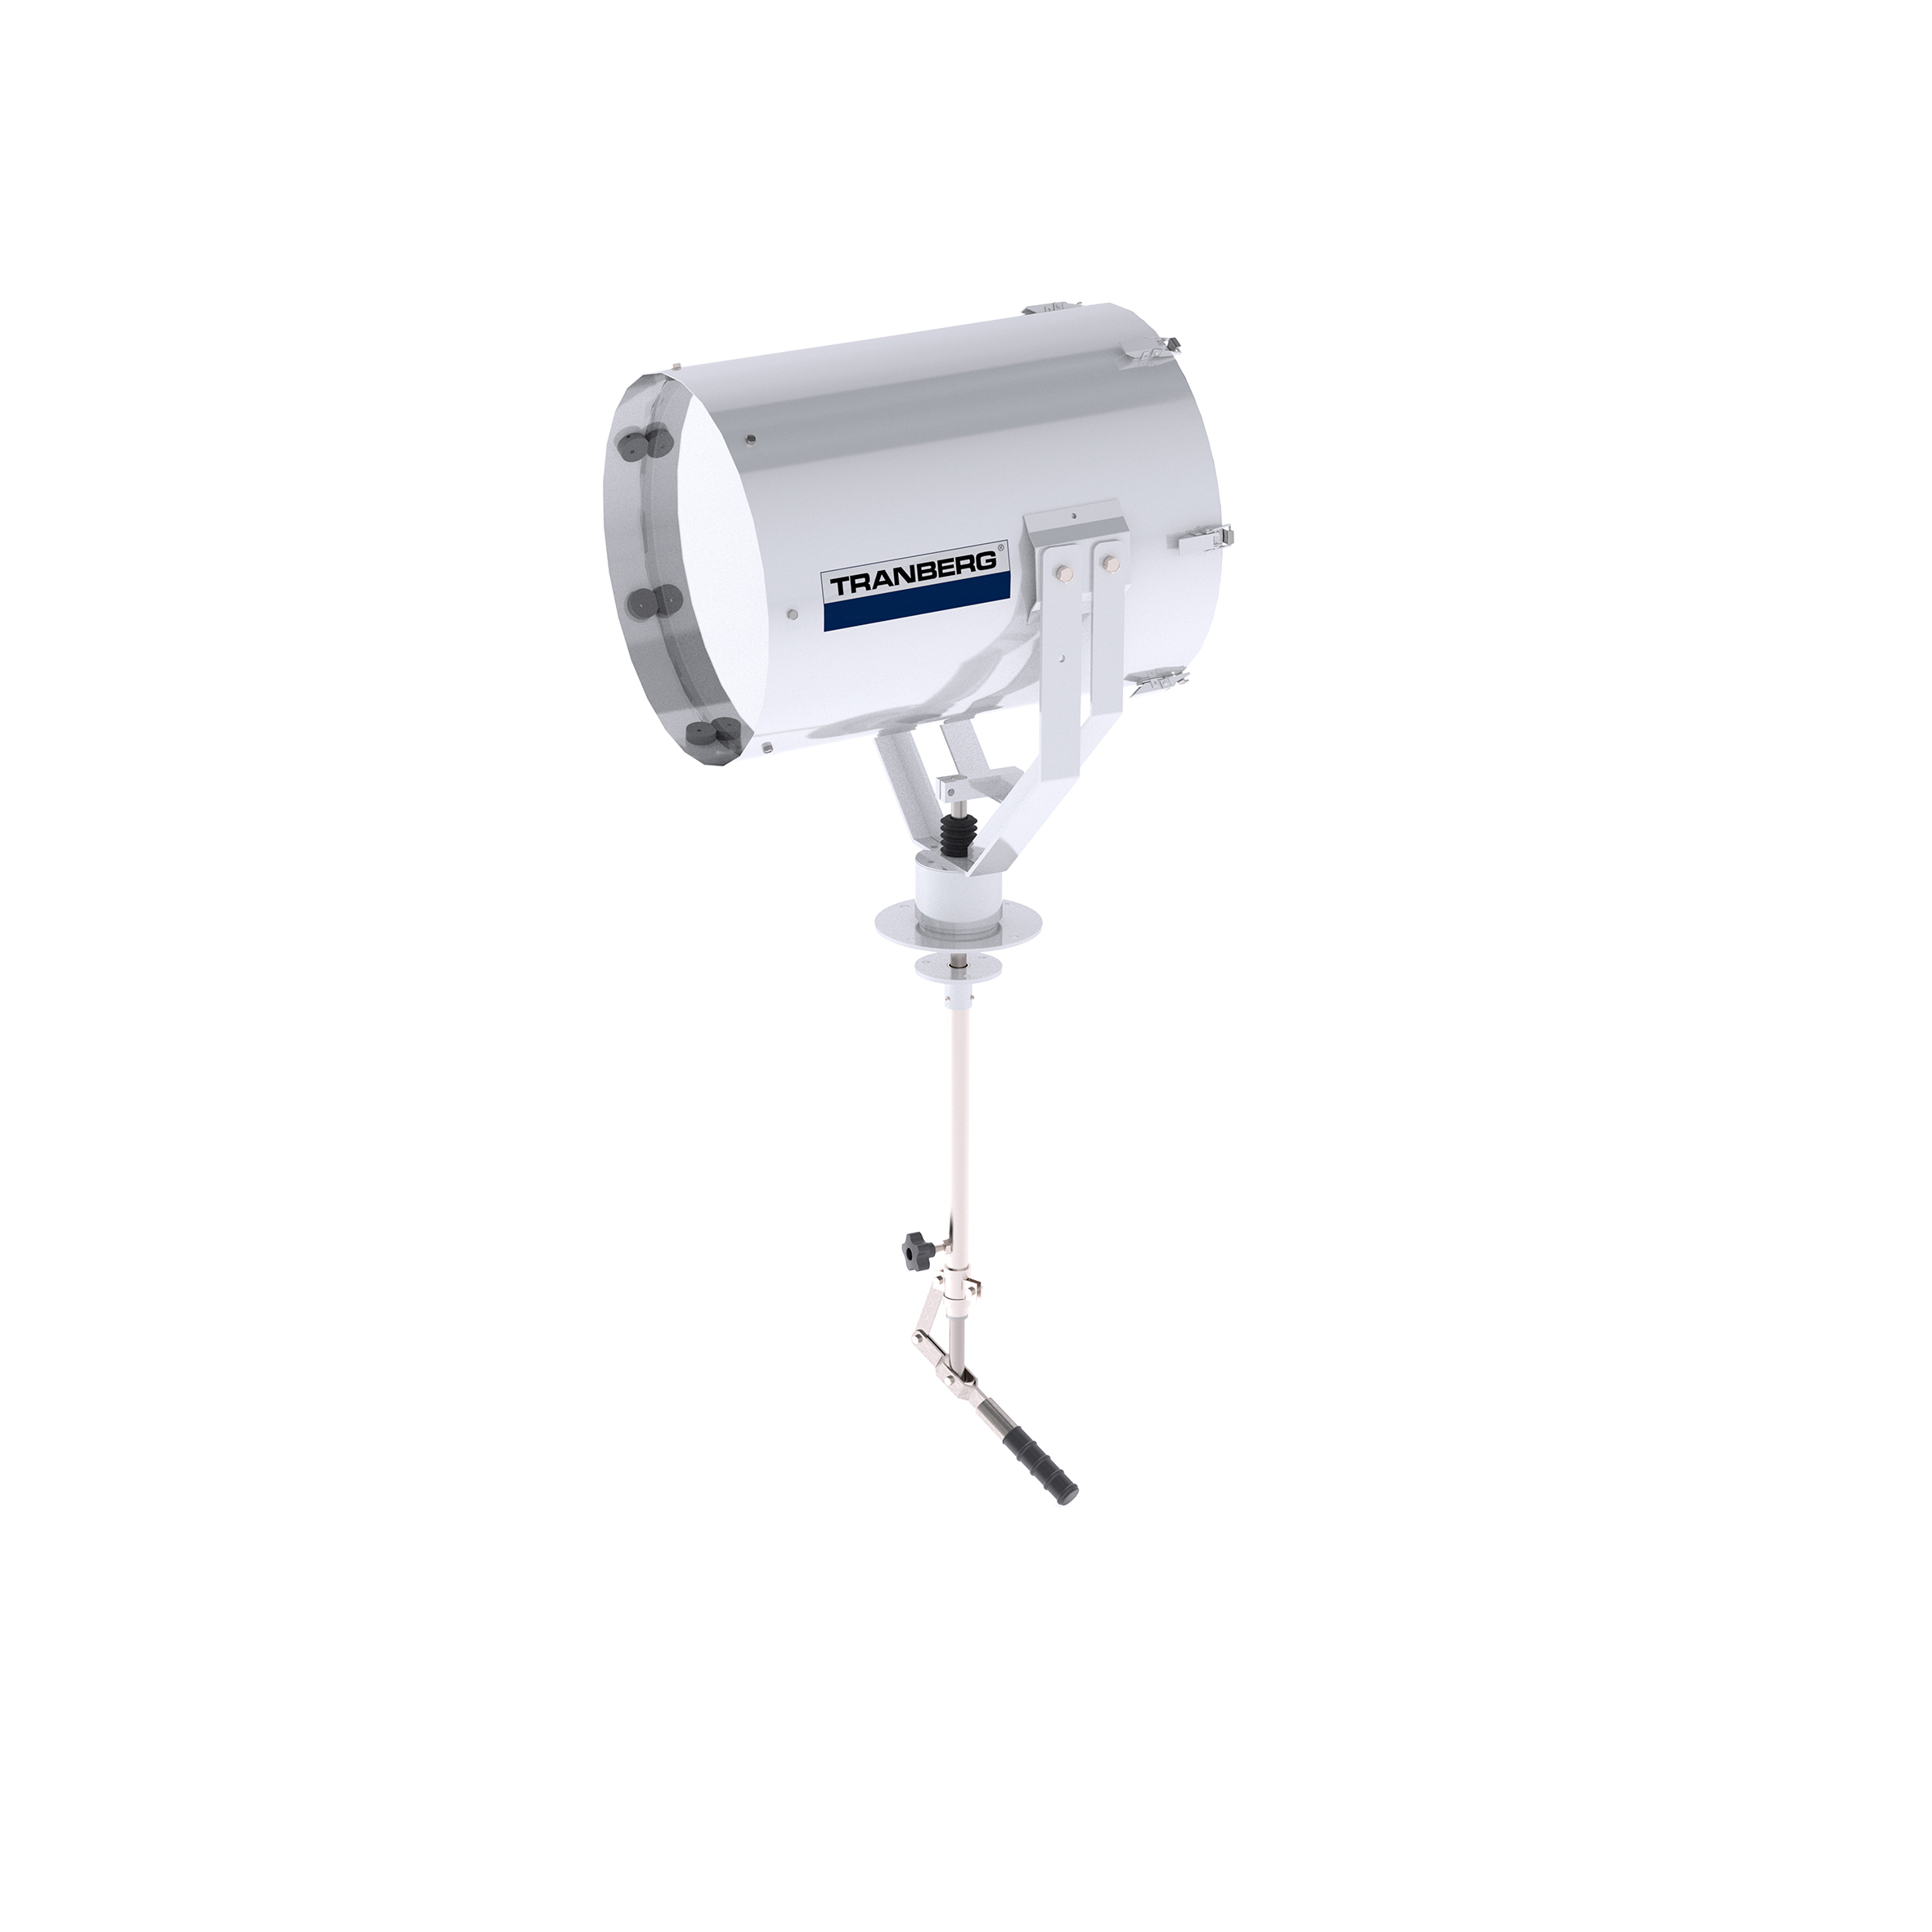 TEF 2630 Searchlight: Halogen 2000W bulb incl, 230V, Bridge Controlled, Stainless Steel